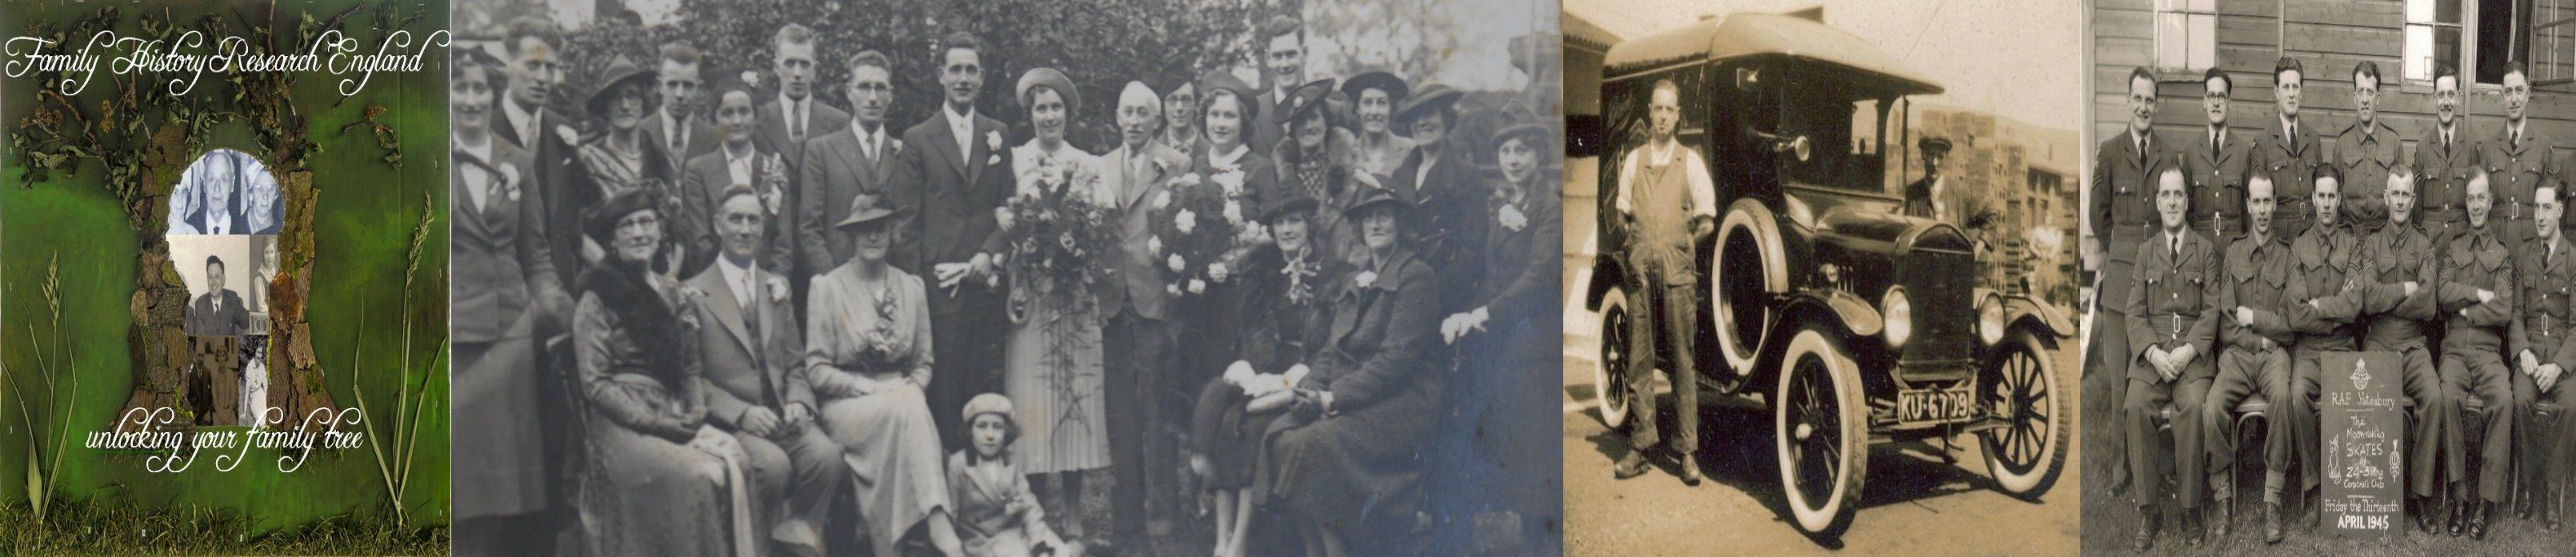 Genealogy photograph for Family History Research England ©.